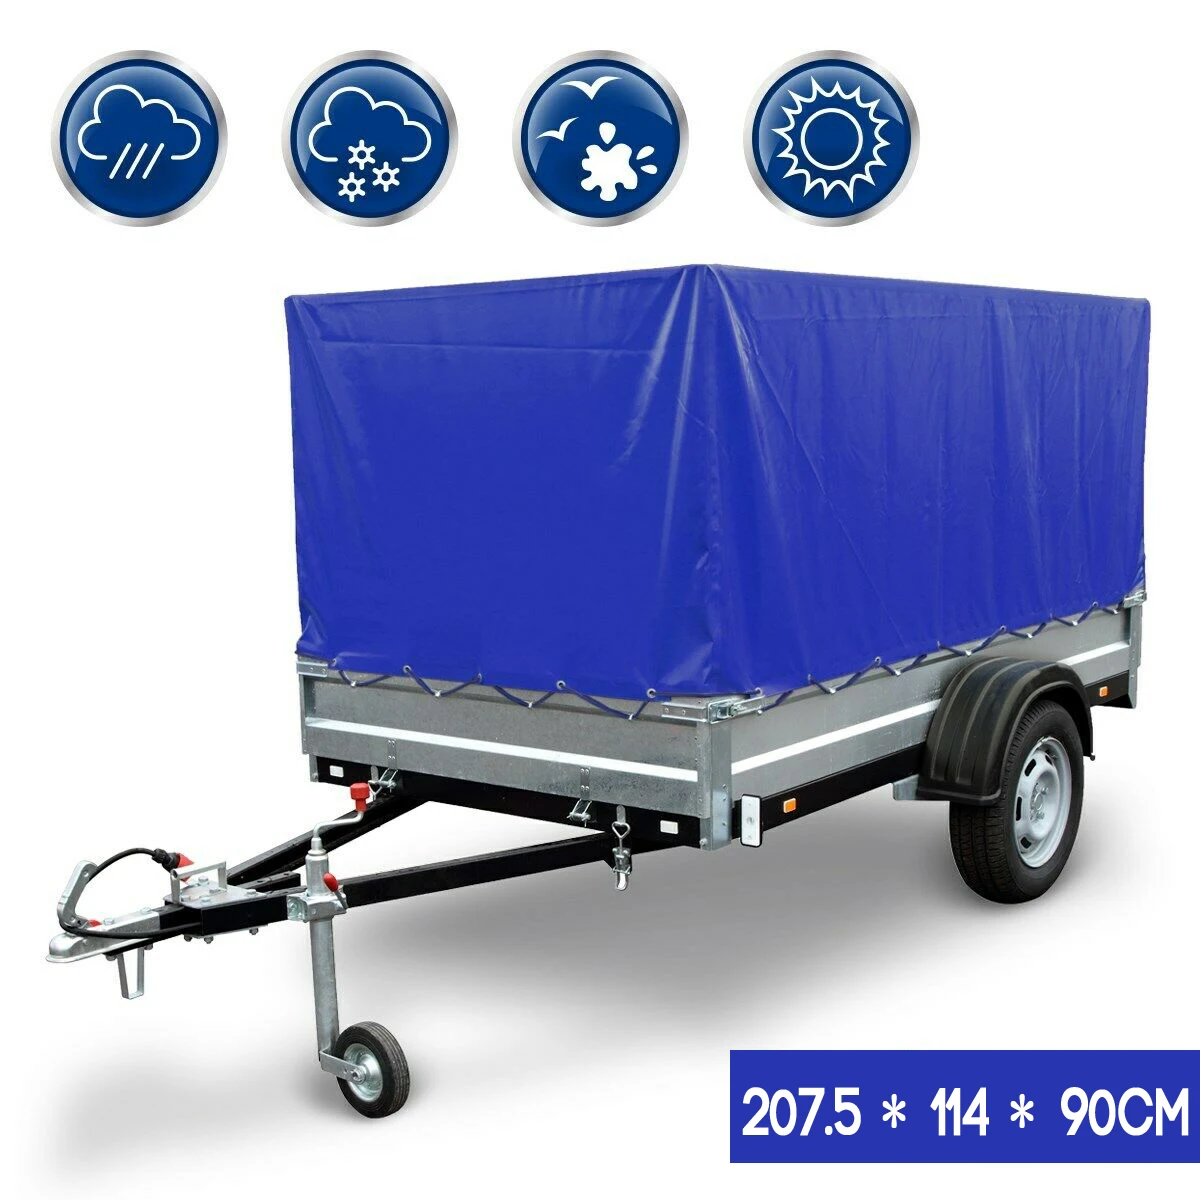 Foldable 207.5*114*90cm Car Trailer Cover Waterproof Protector Dust Resistant Protection Covers Camping